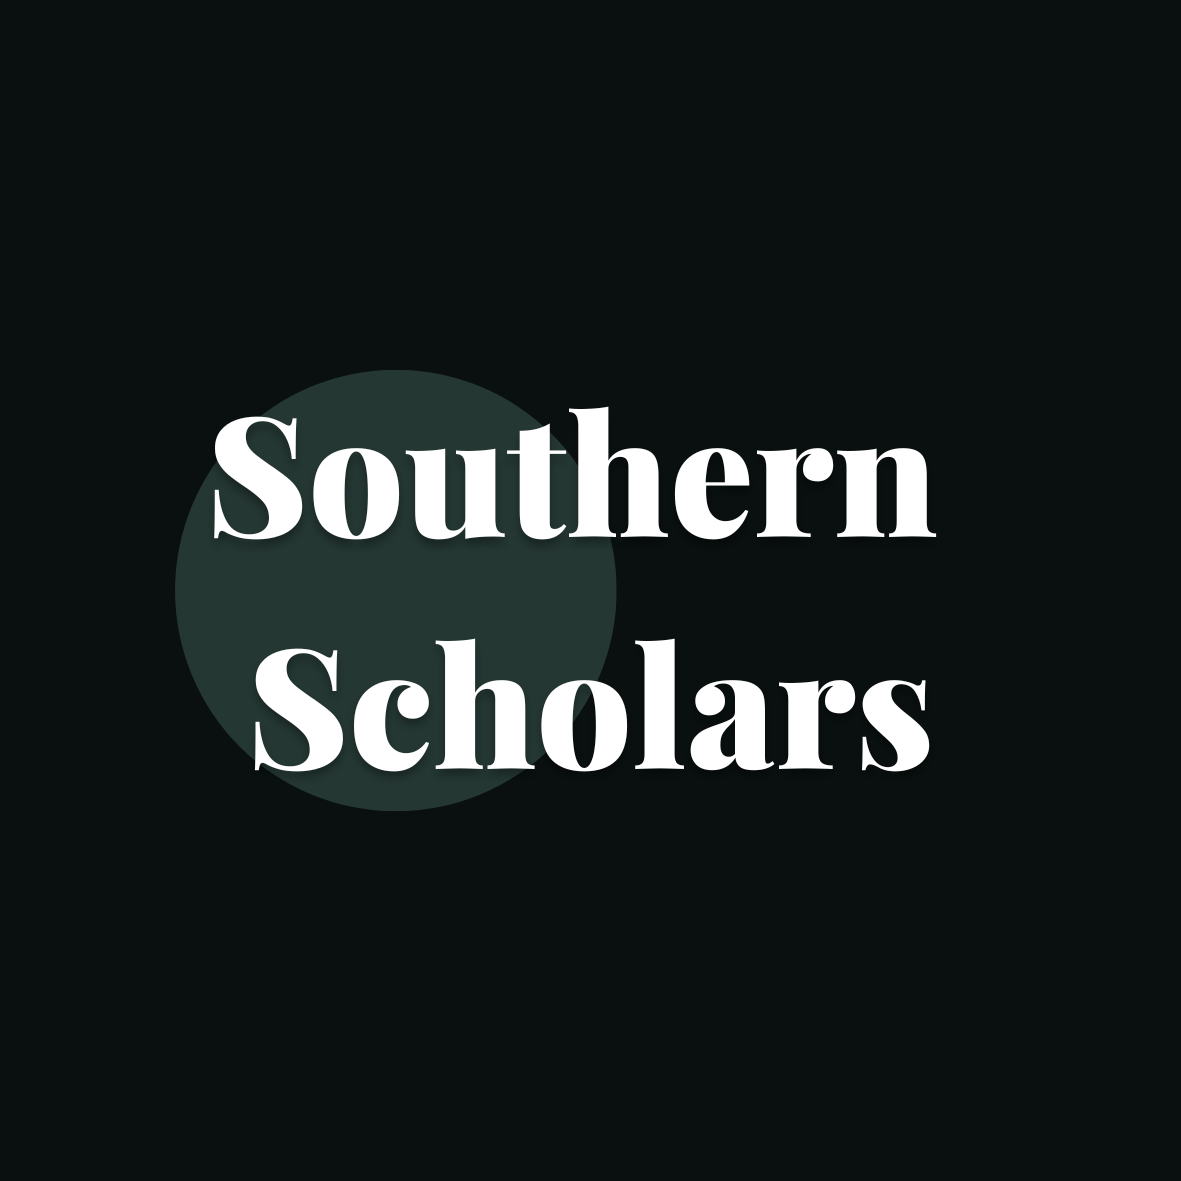 Southern Scholars